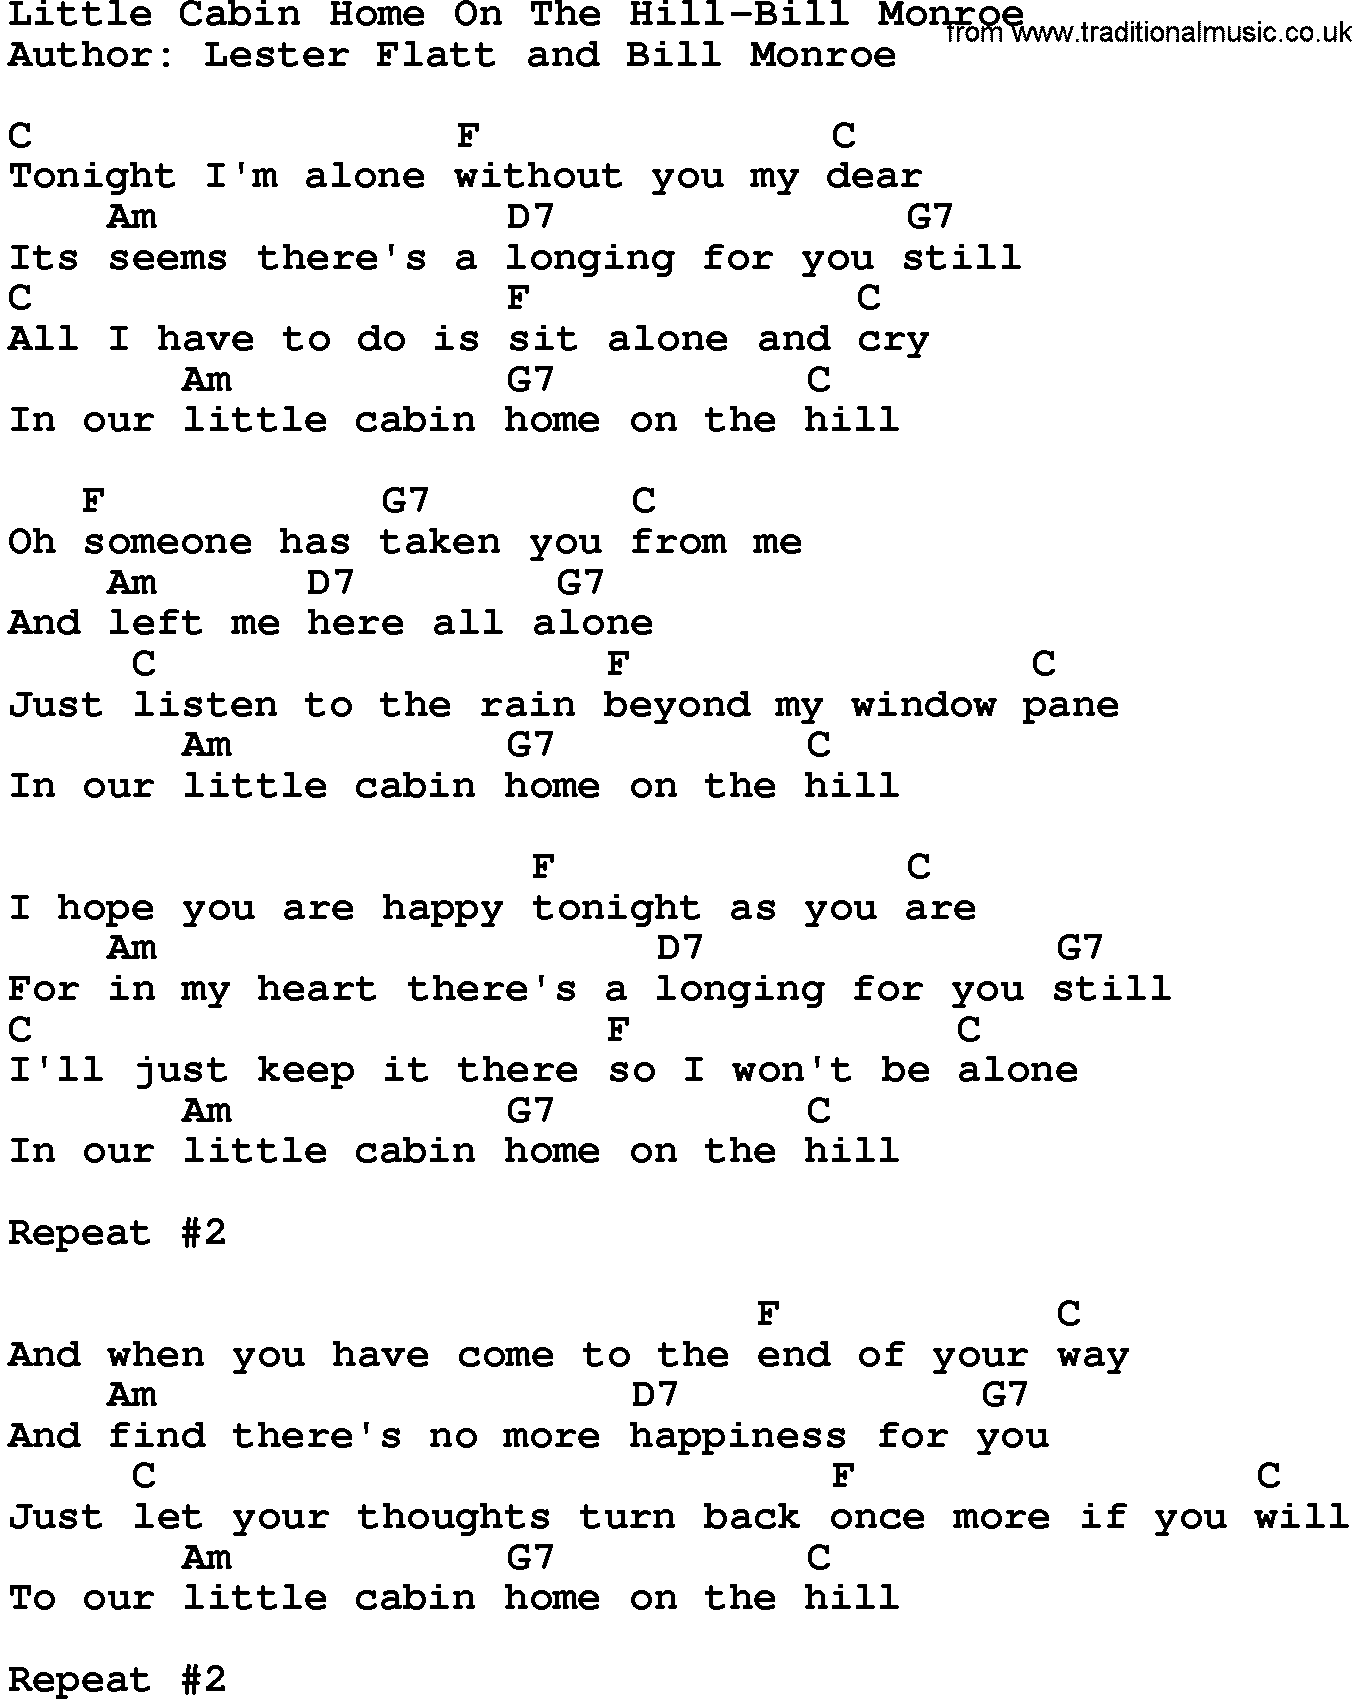 Country music song: Little Cabin Home On The Hill-Bill Monroe lyrics and chords